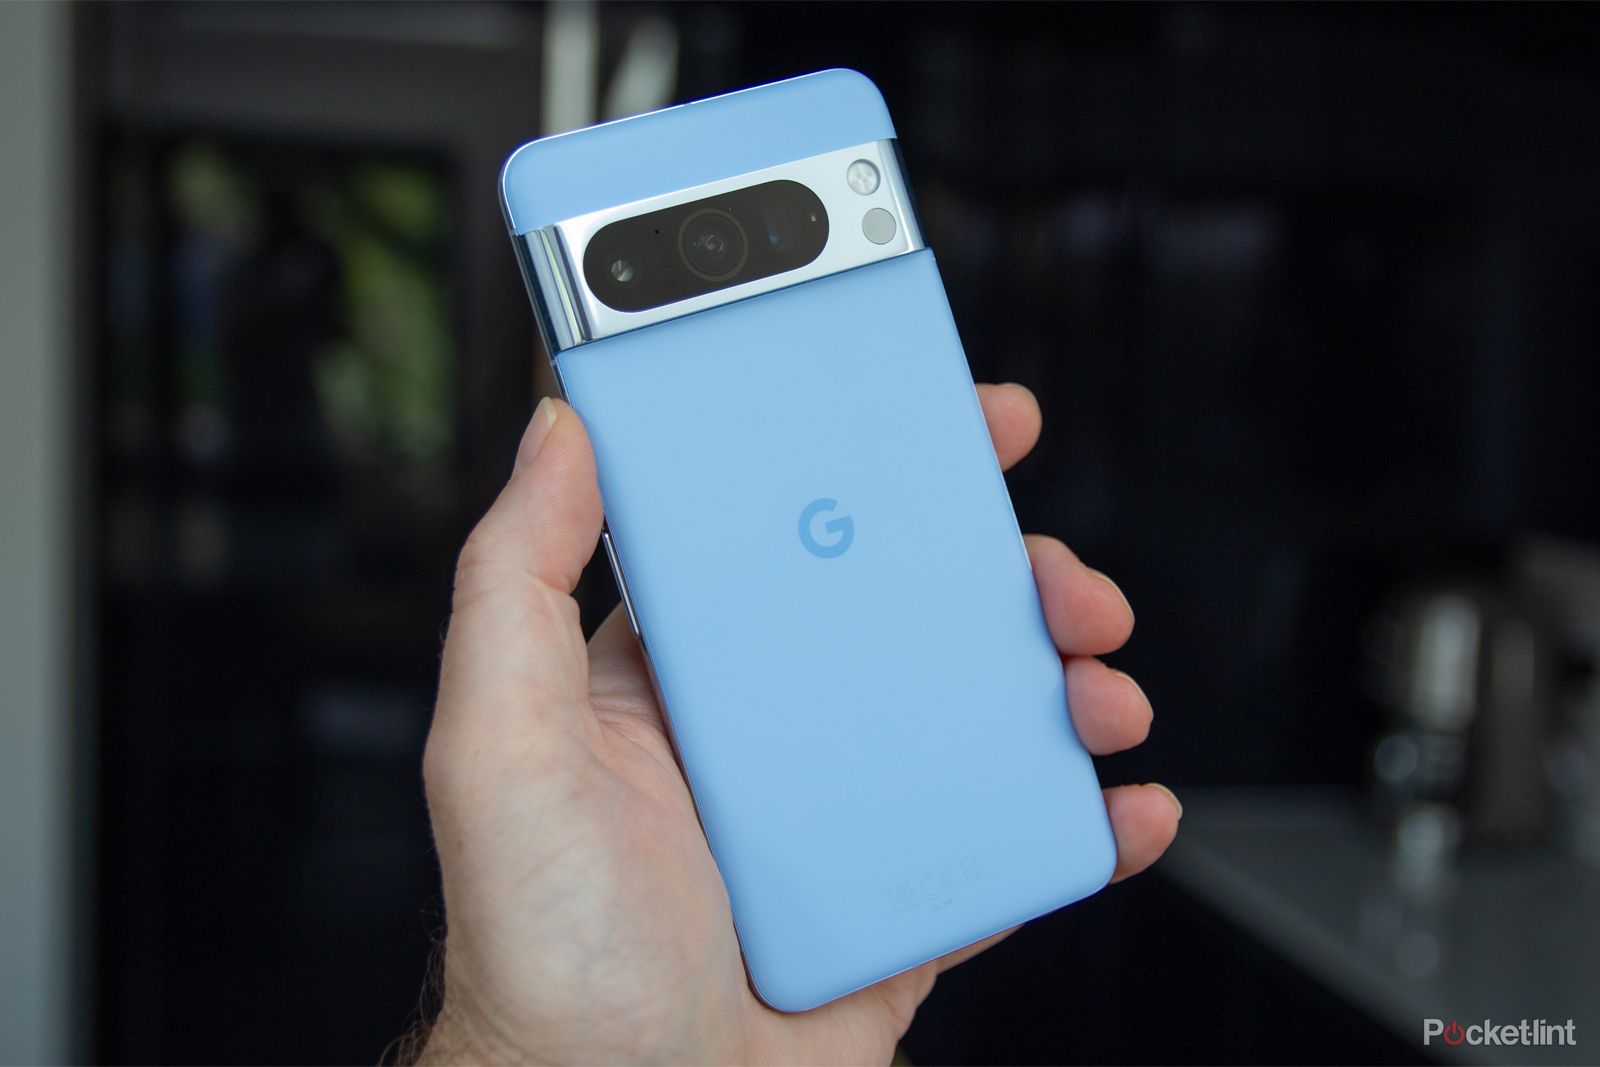 Google just went and reinvented smartphone photography